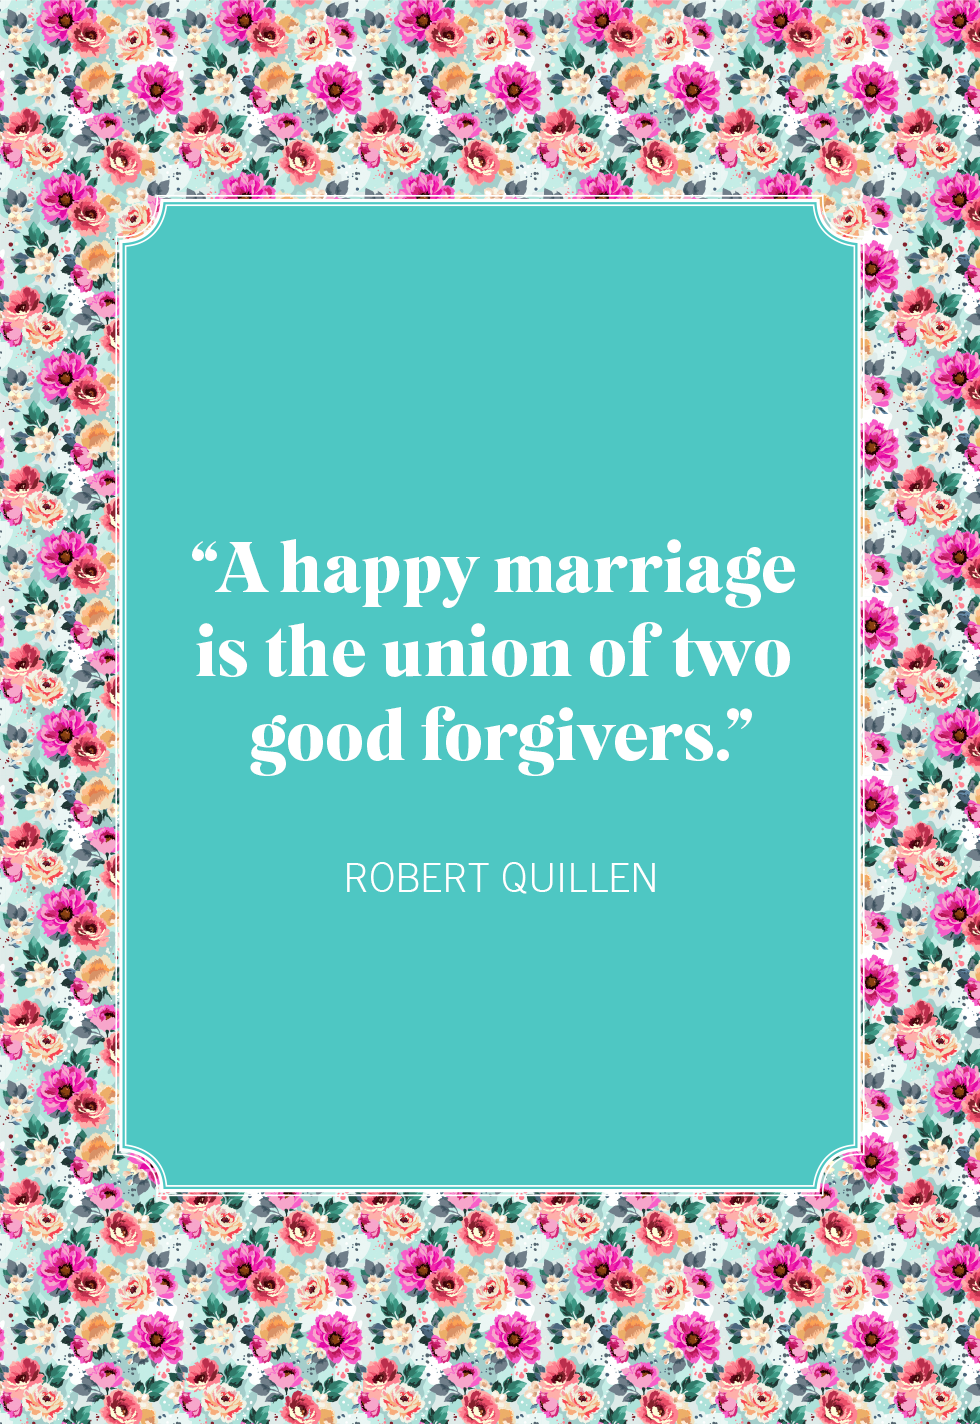 95 Short and Sweet Wedding Quotes